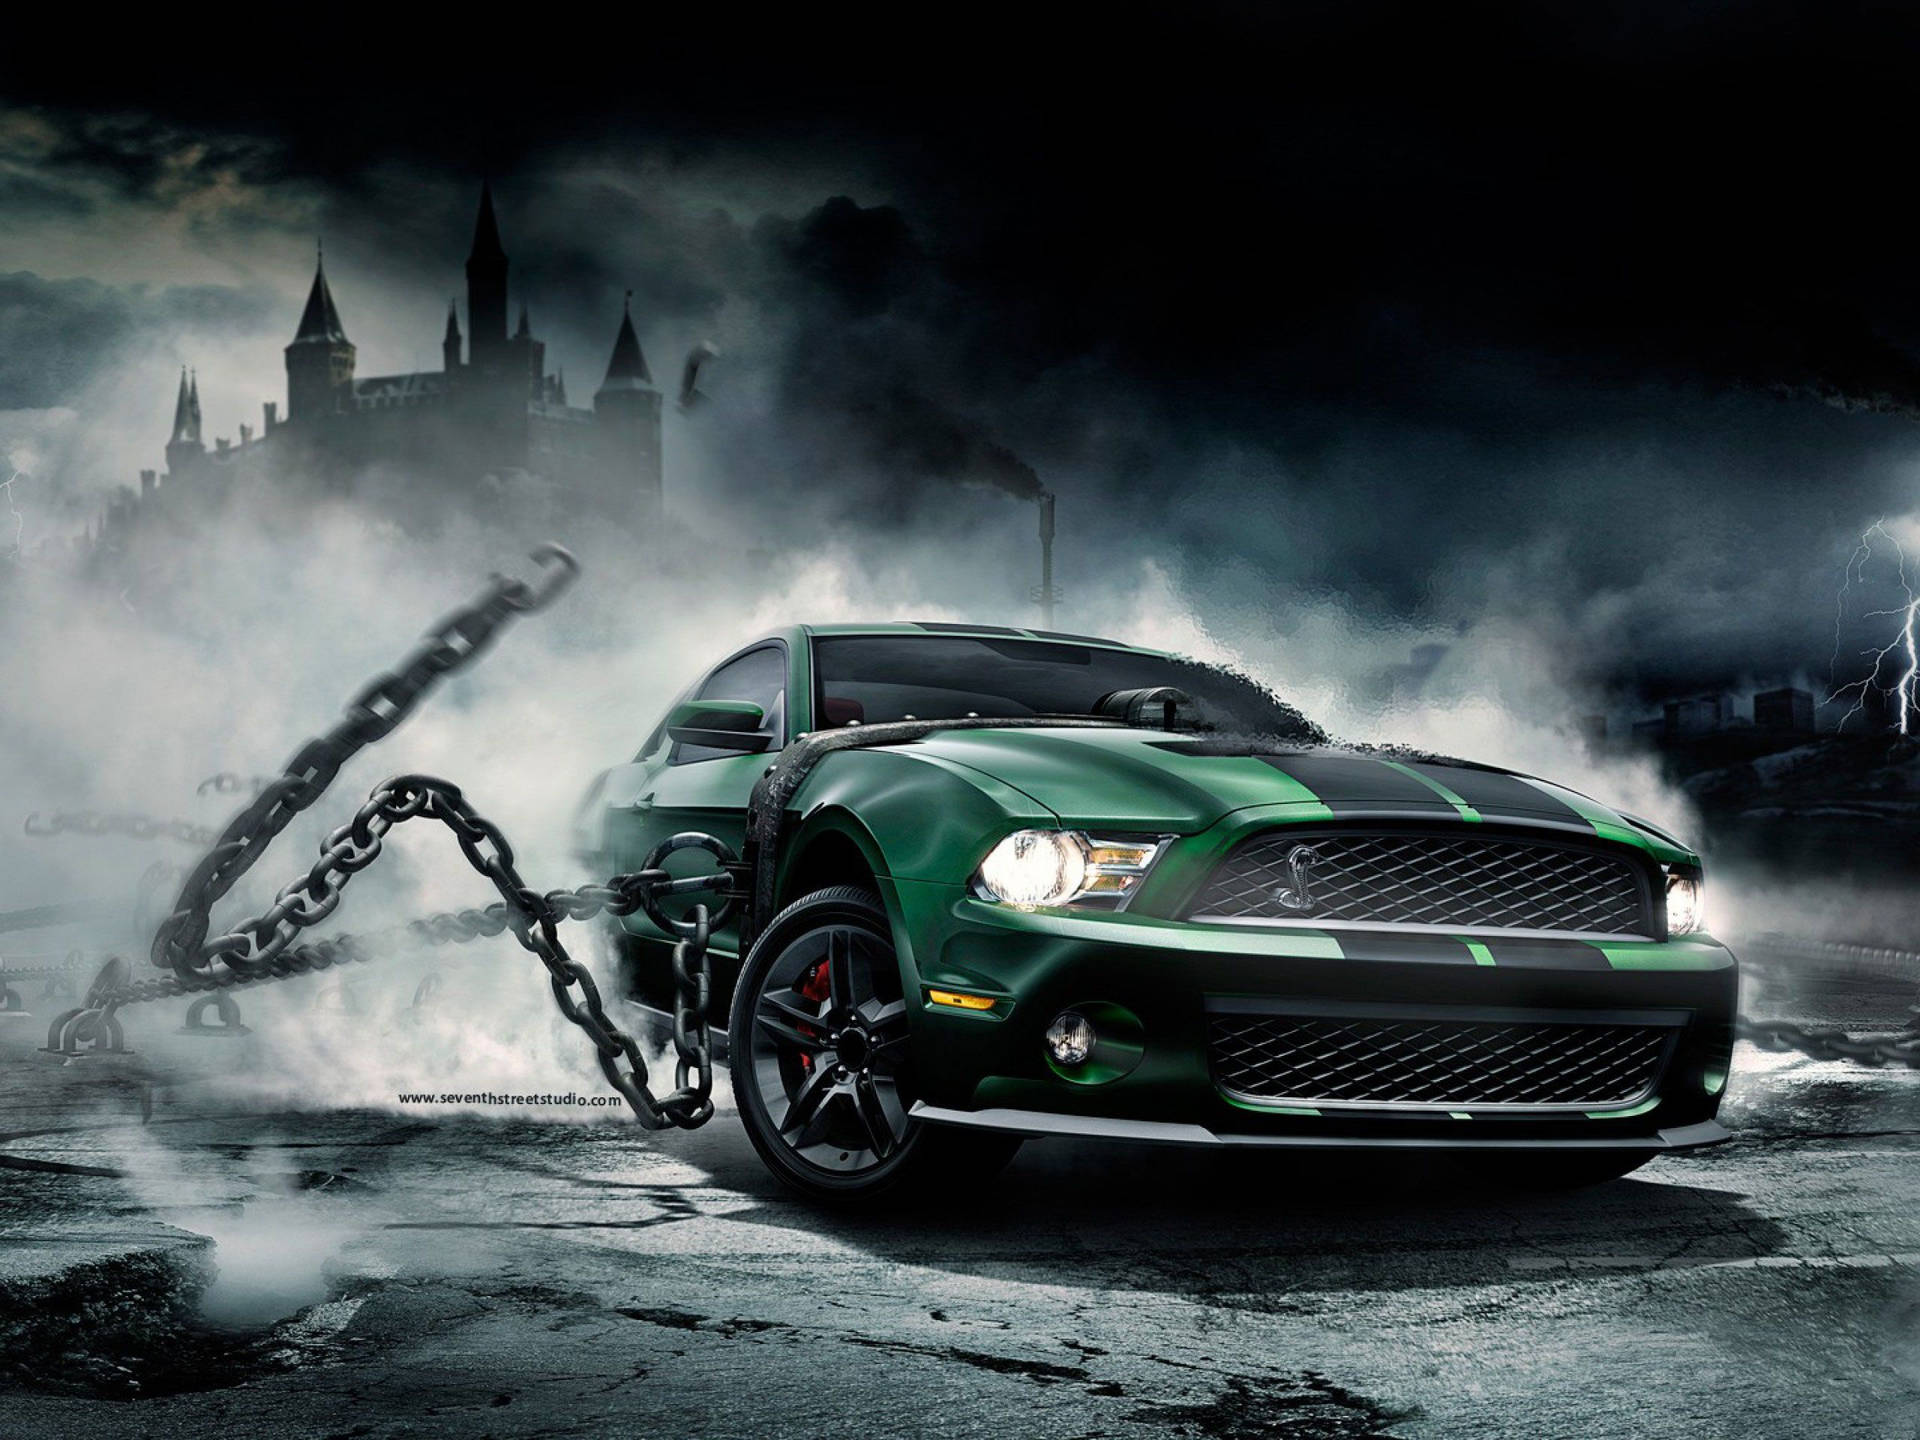 Power and Speed on Display in this Exotic 3D Green Car Wallpaper